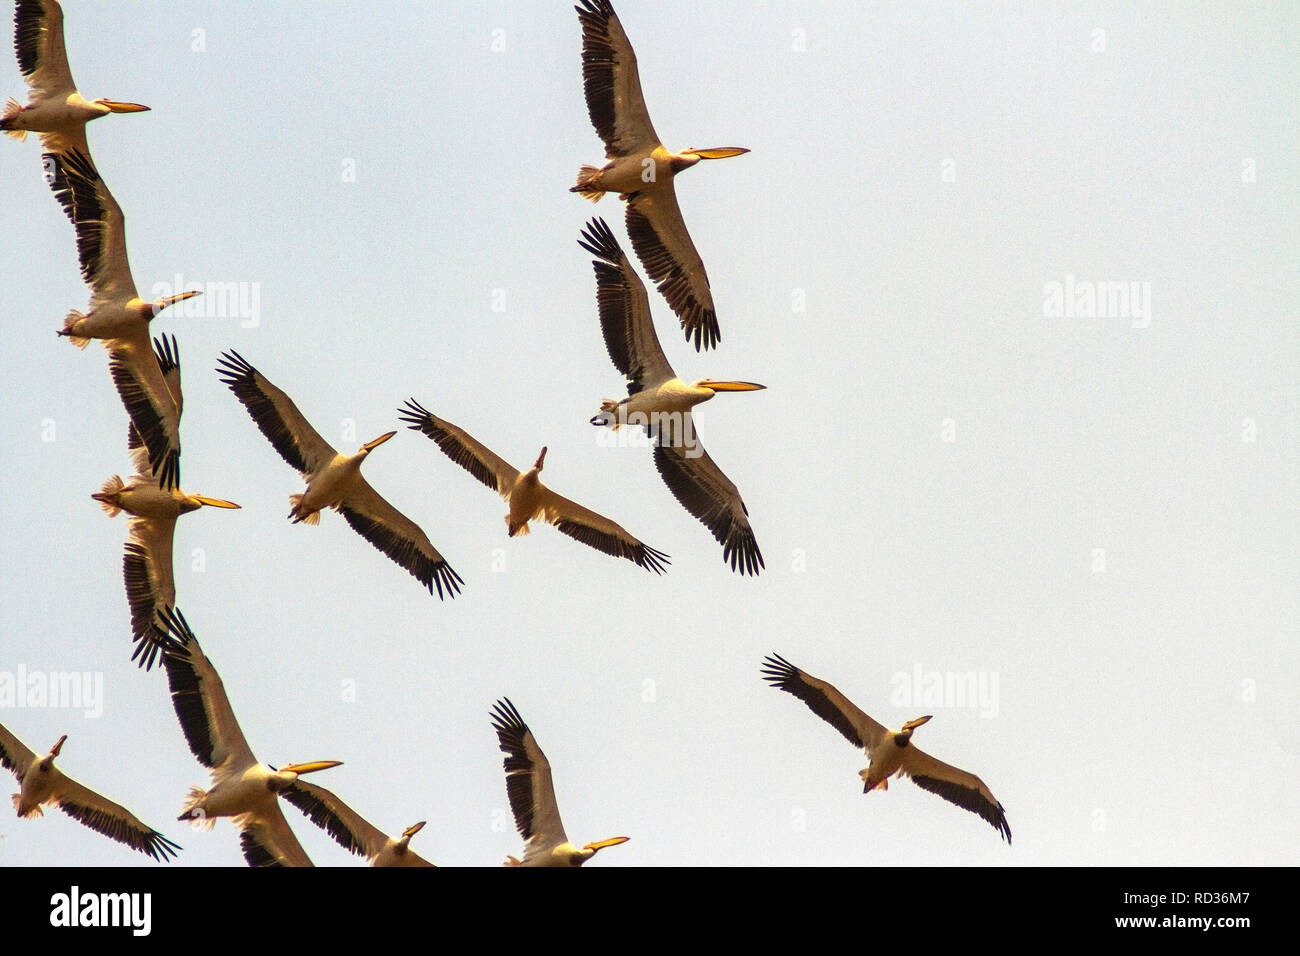 A squadron of great white pelicans (Pelecanus onocrotalus) circling over the Chobe River. Stock Photo